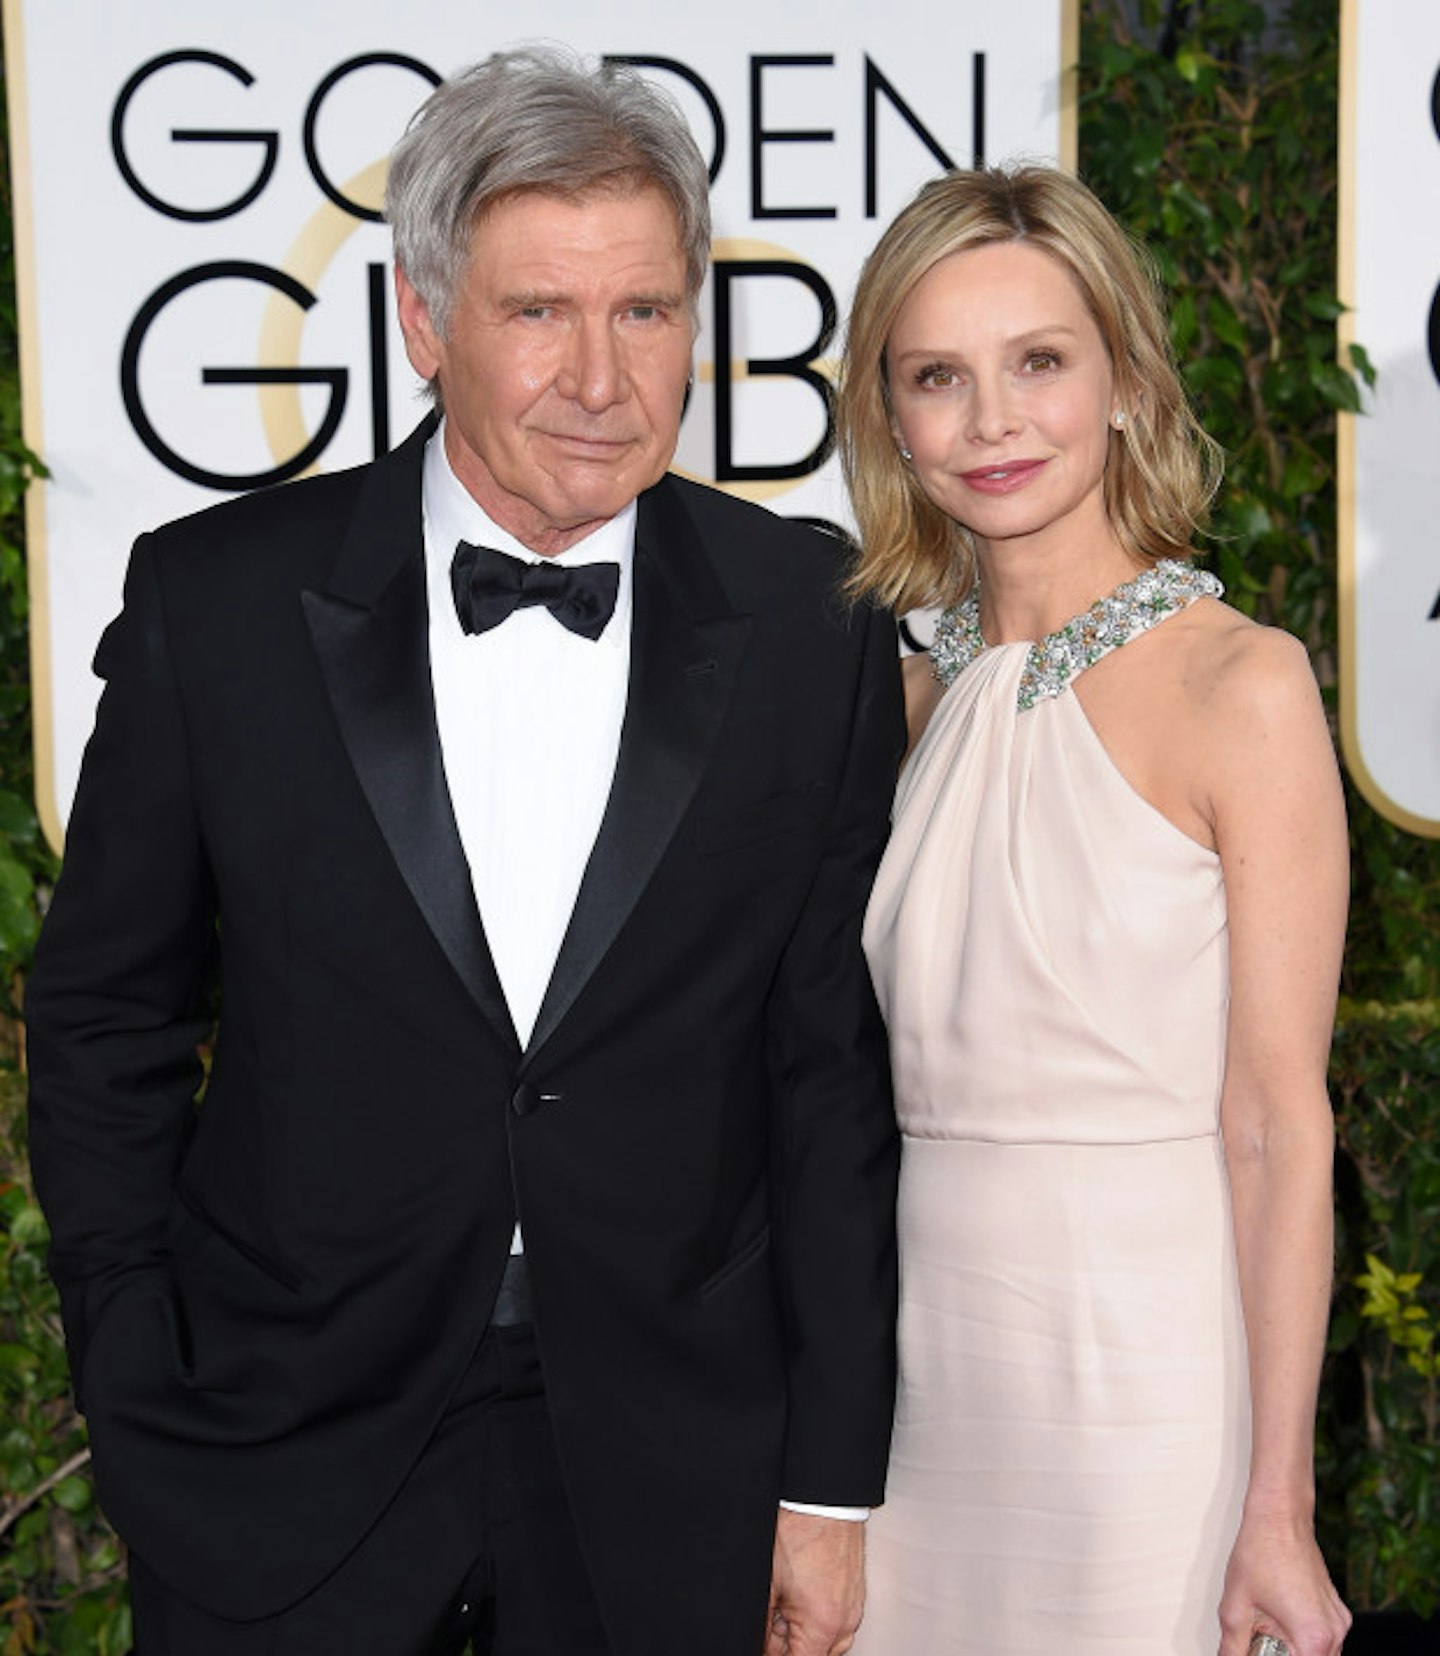 Harrison Ford and his wife Calista Flockhart at the Golden Globes 2015